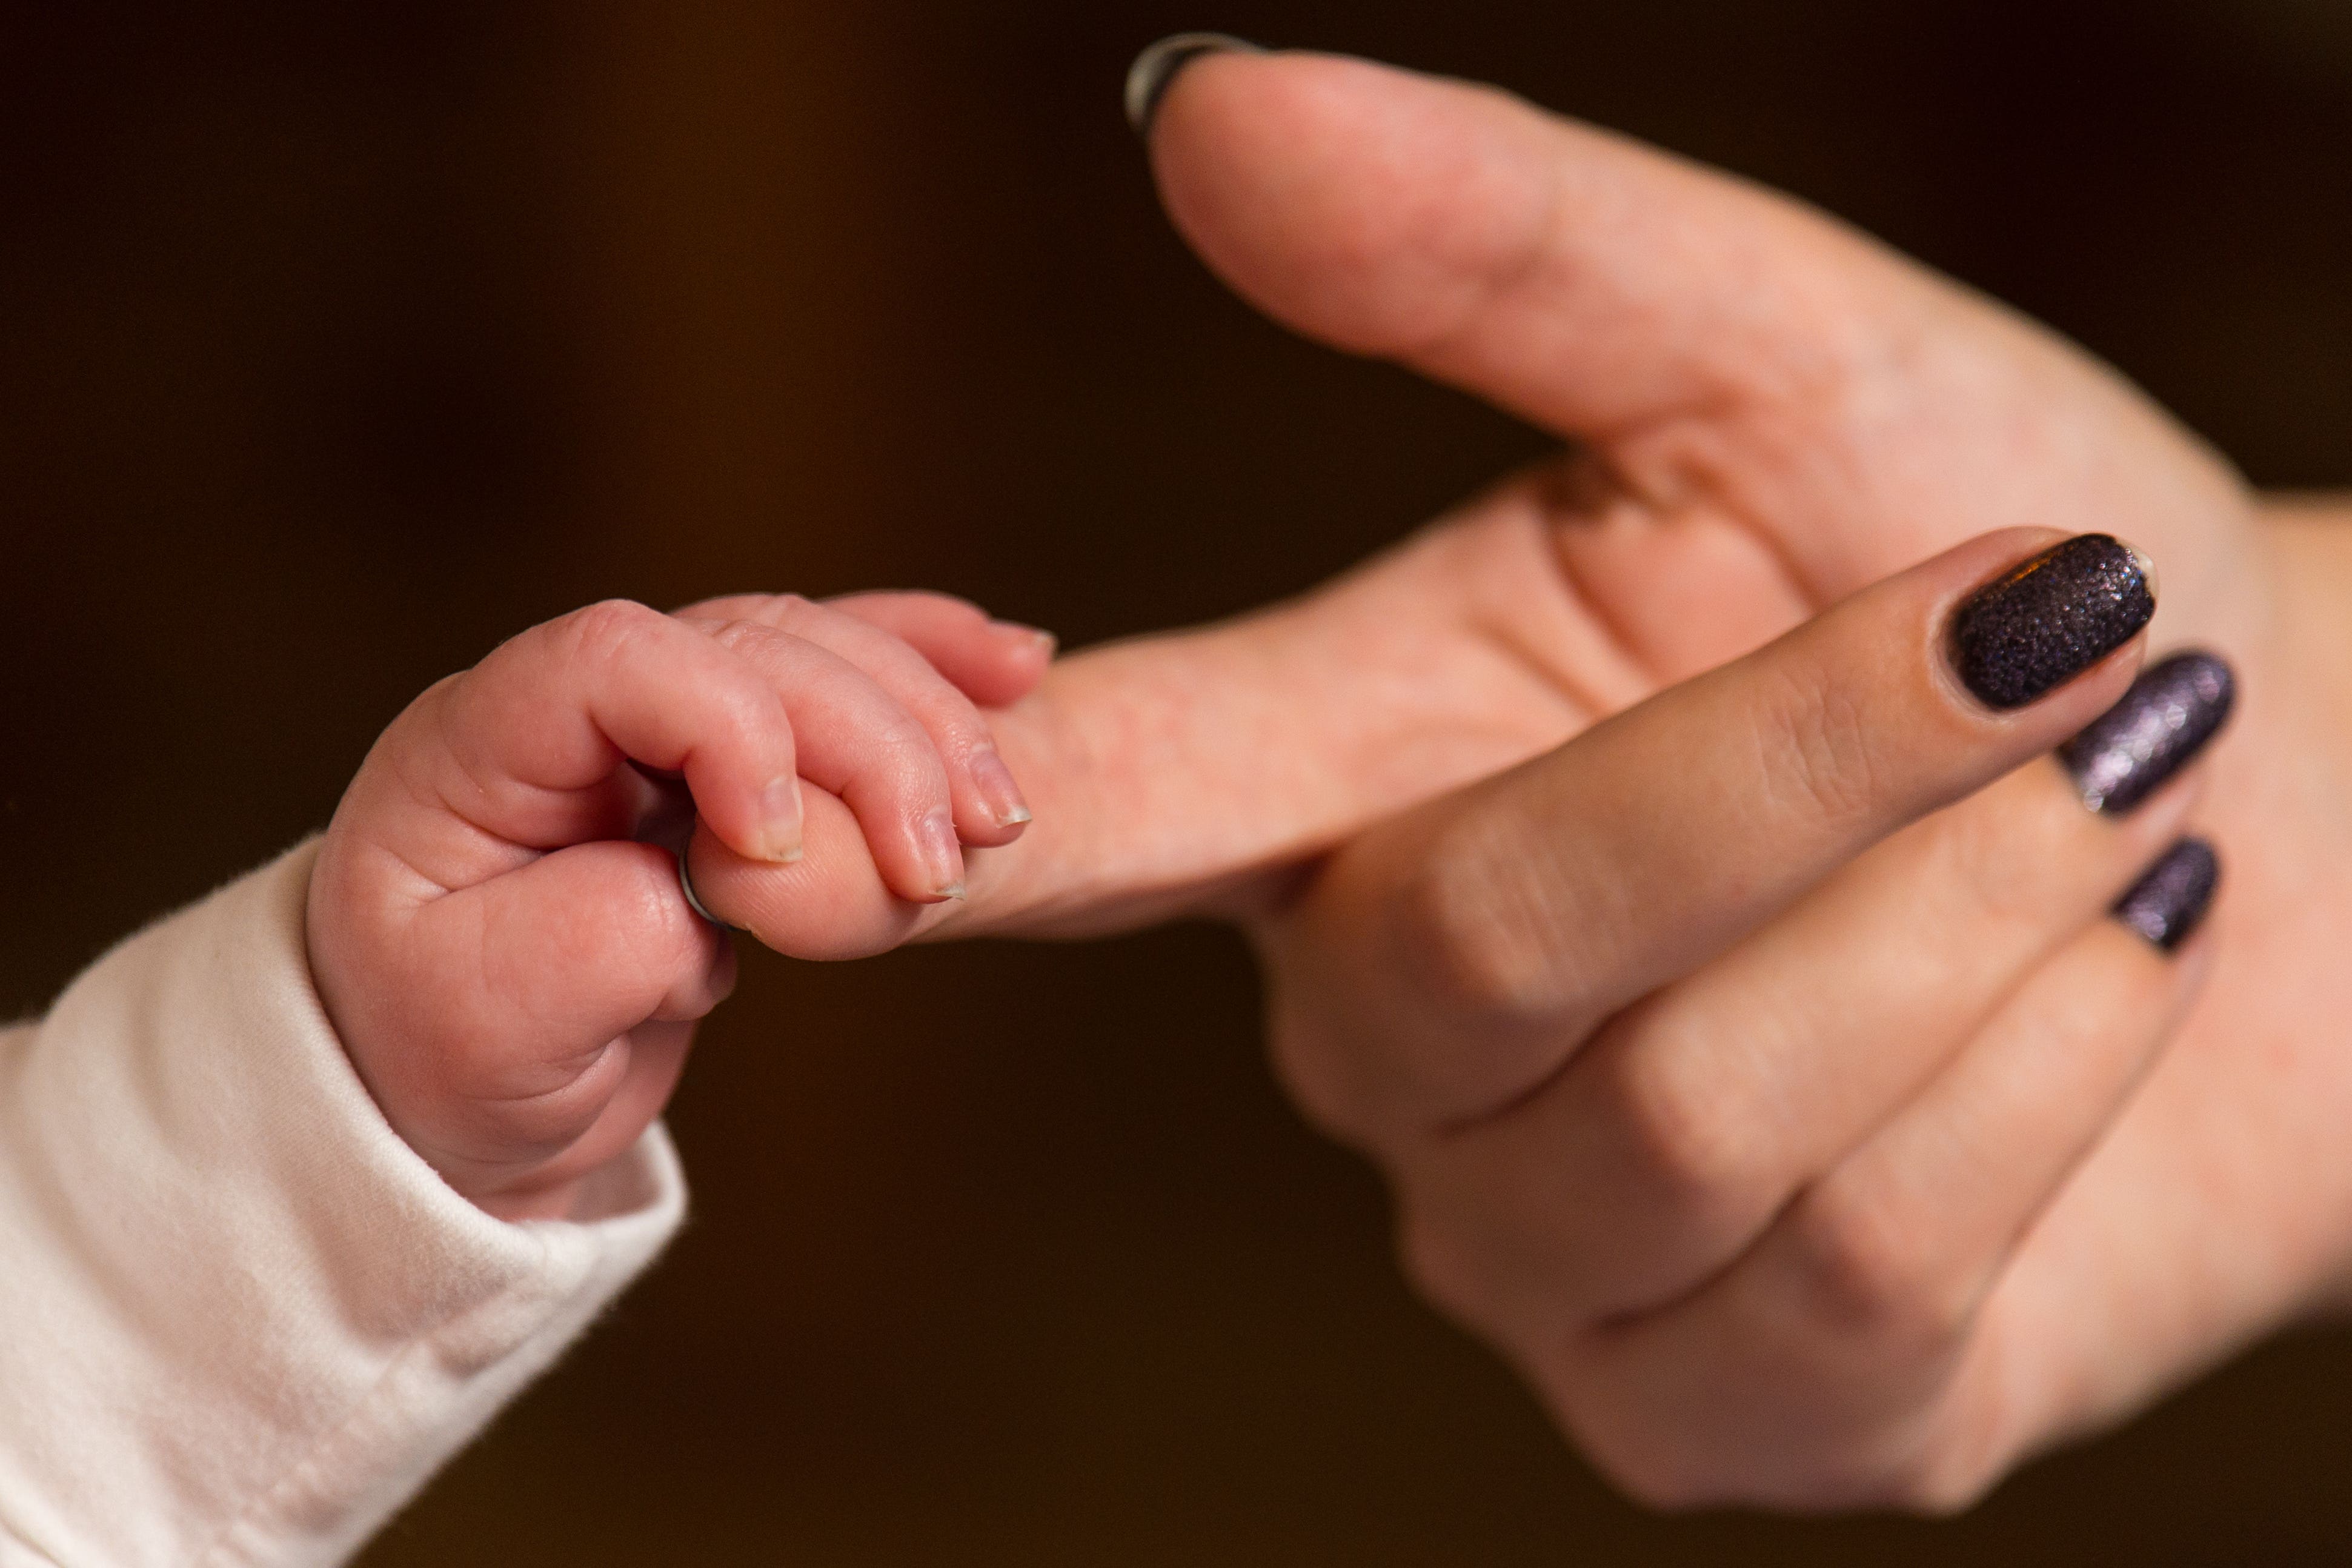 A baby boy, possibly Boy, grabs the finger of his mother